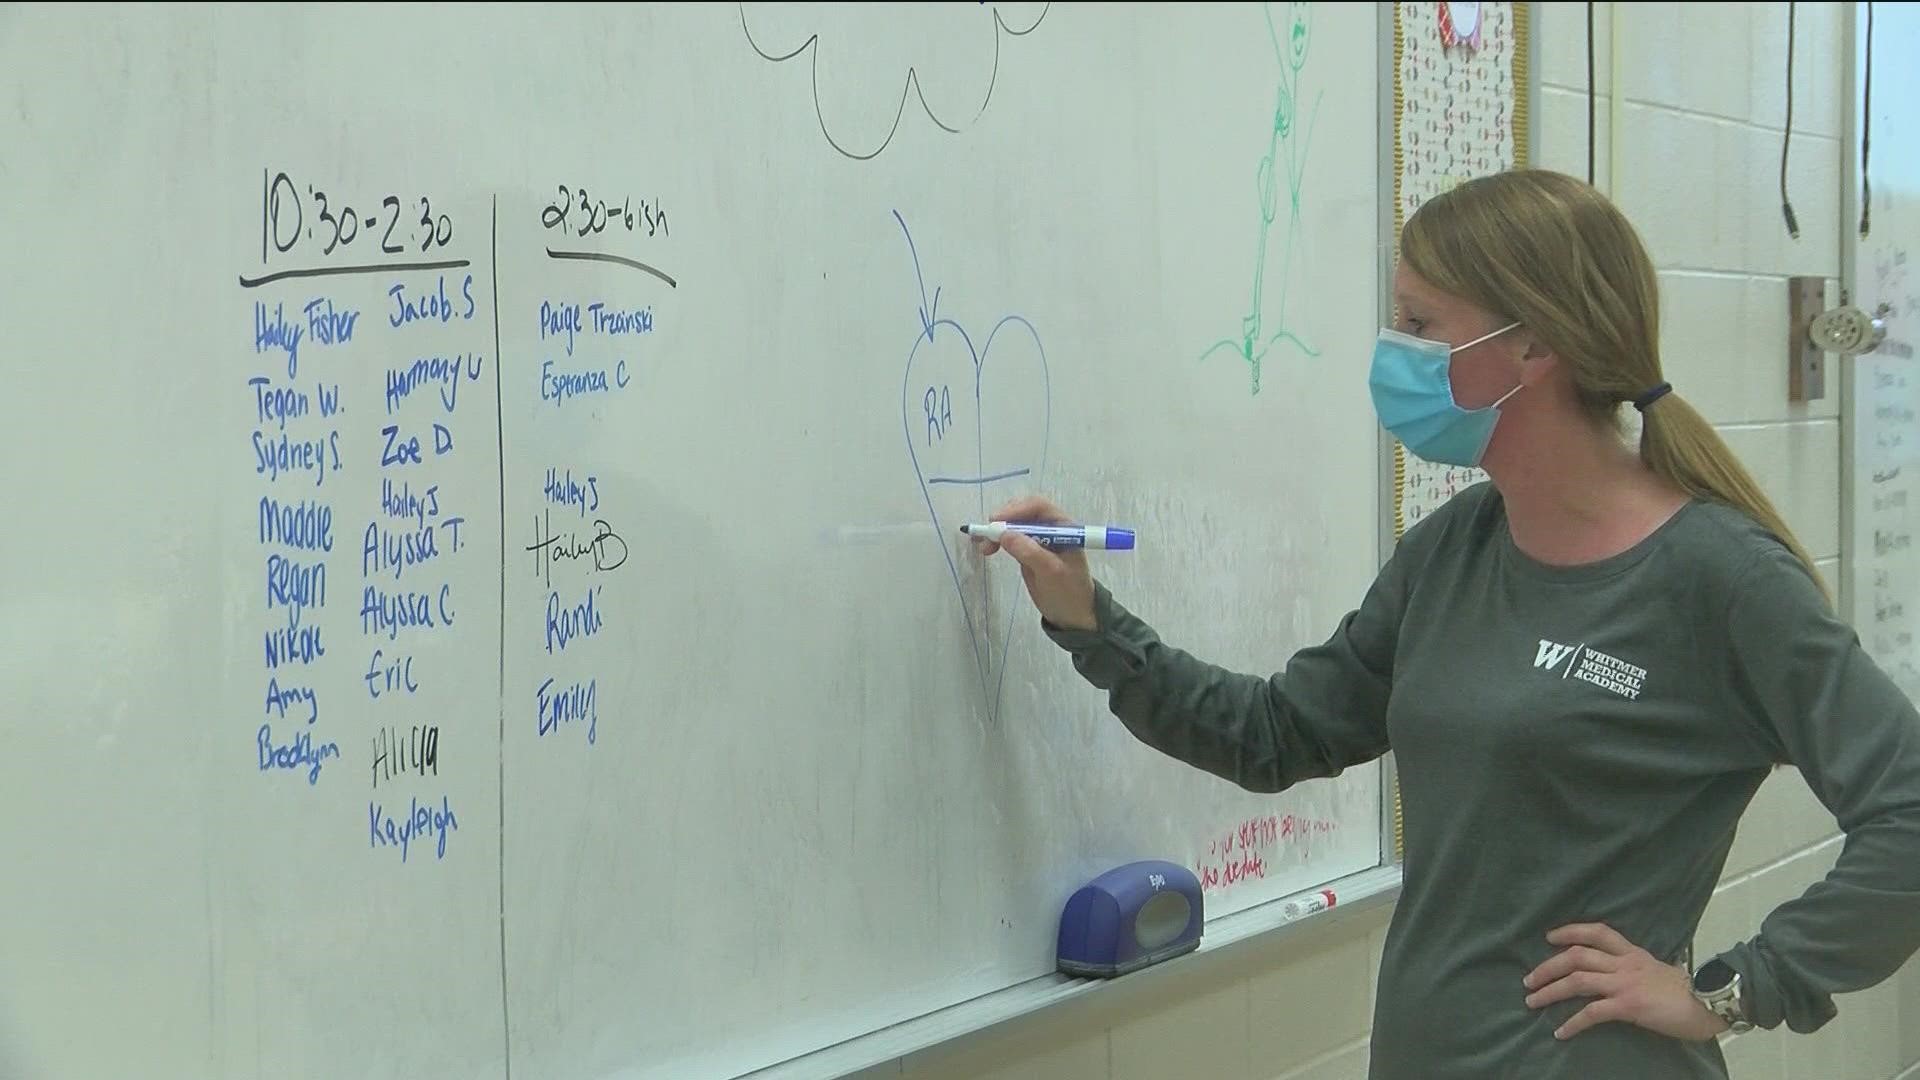 Superintendent Kadee Anstadt said some kids are struggling with skills like problem-solving, collaboration and empathy after returning from the COVID-19 pandemic.